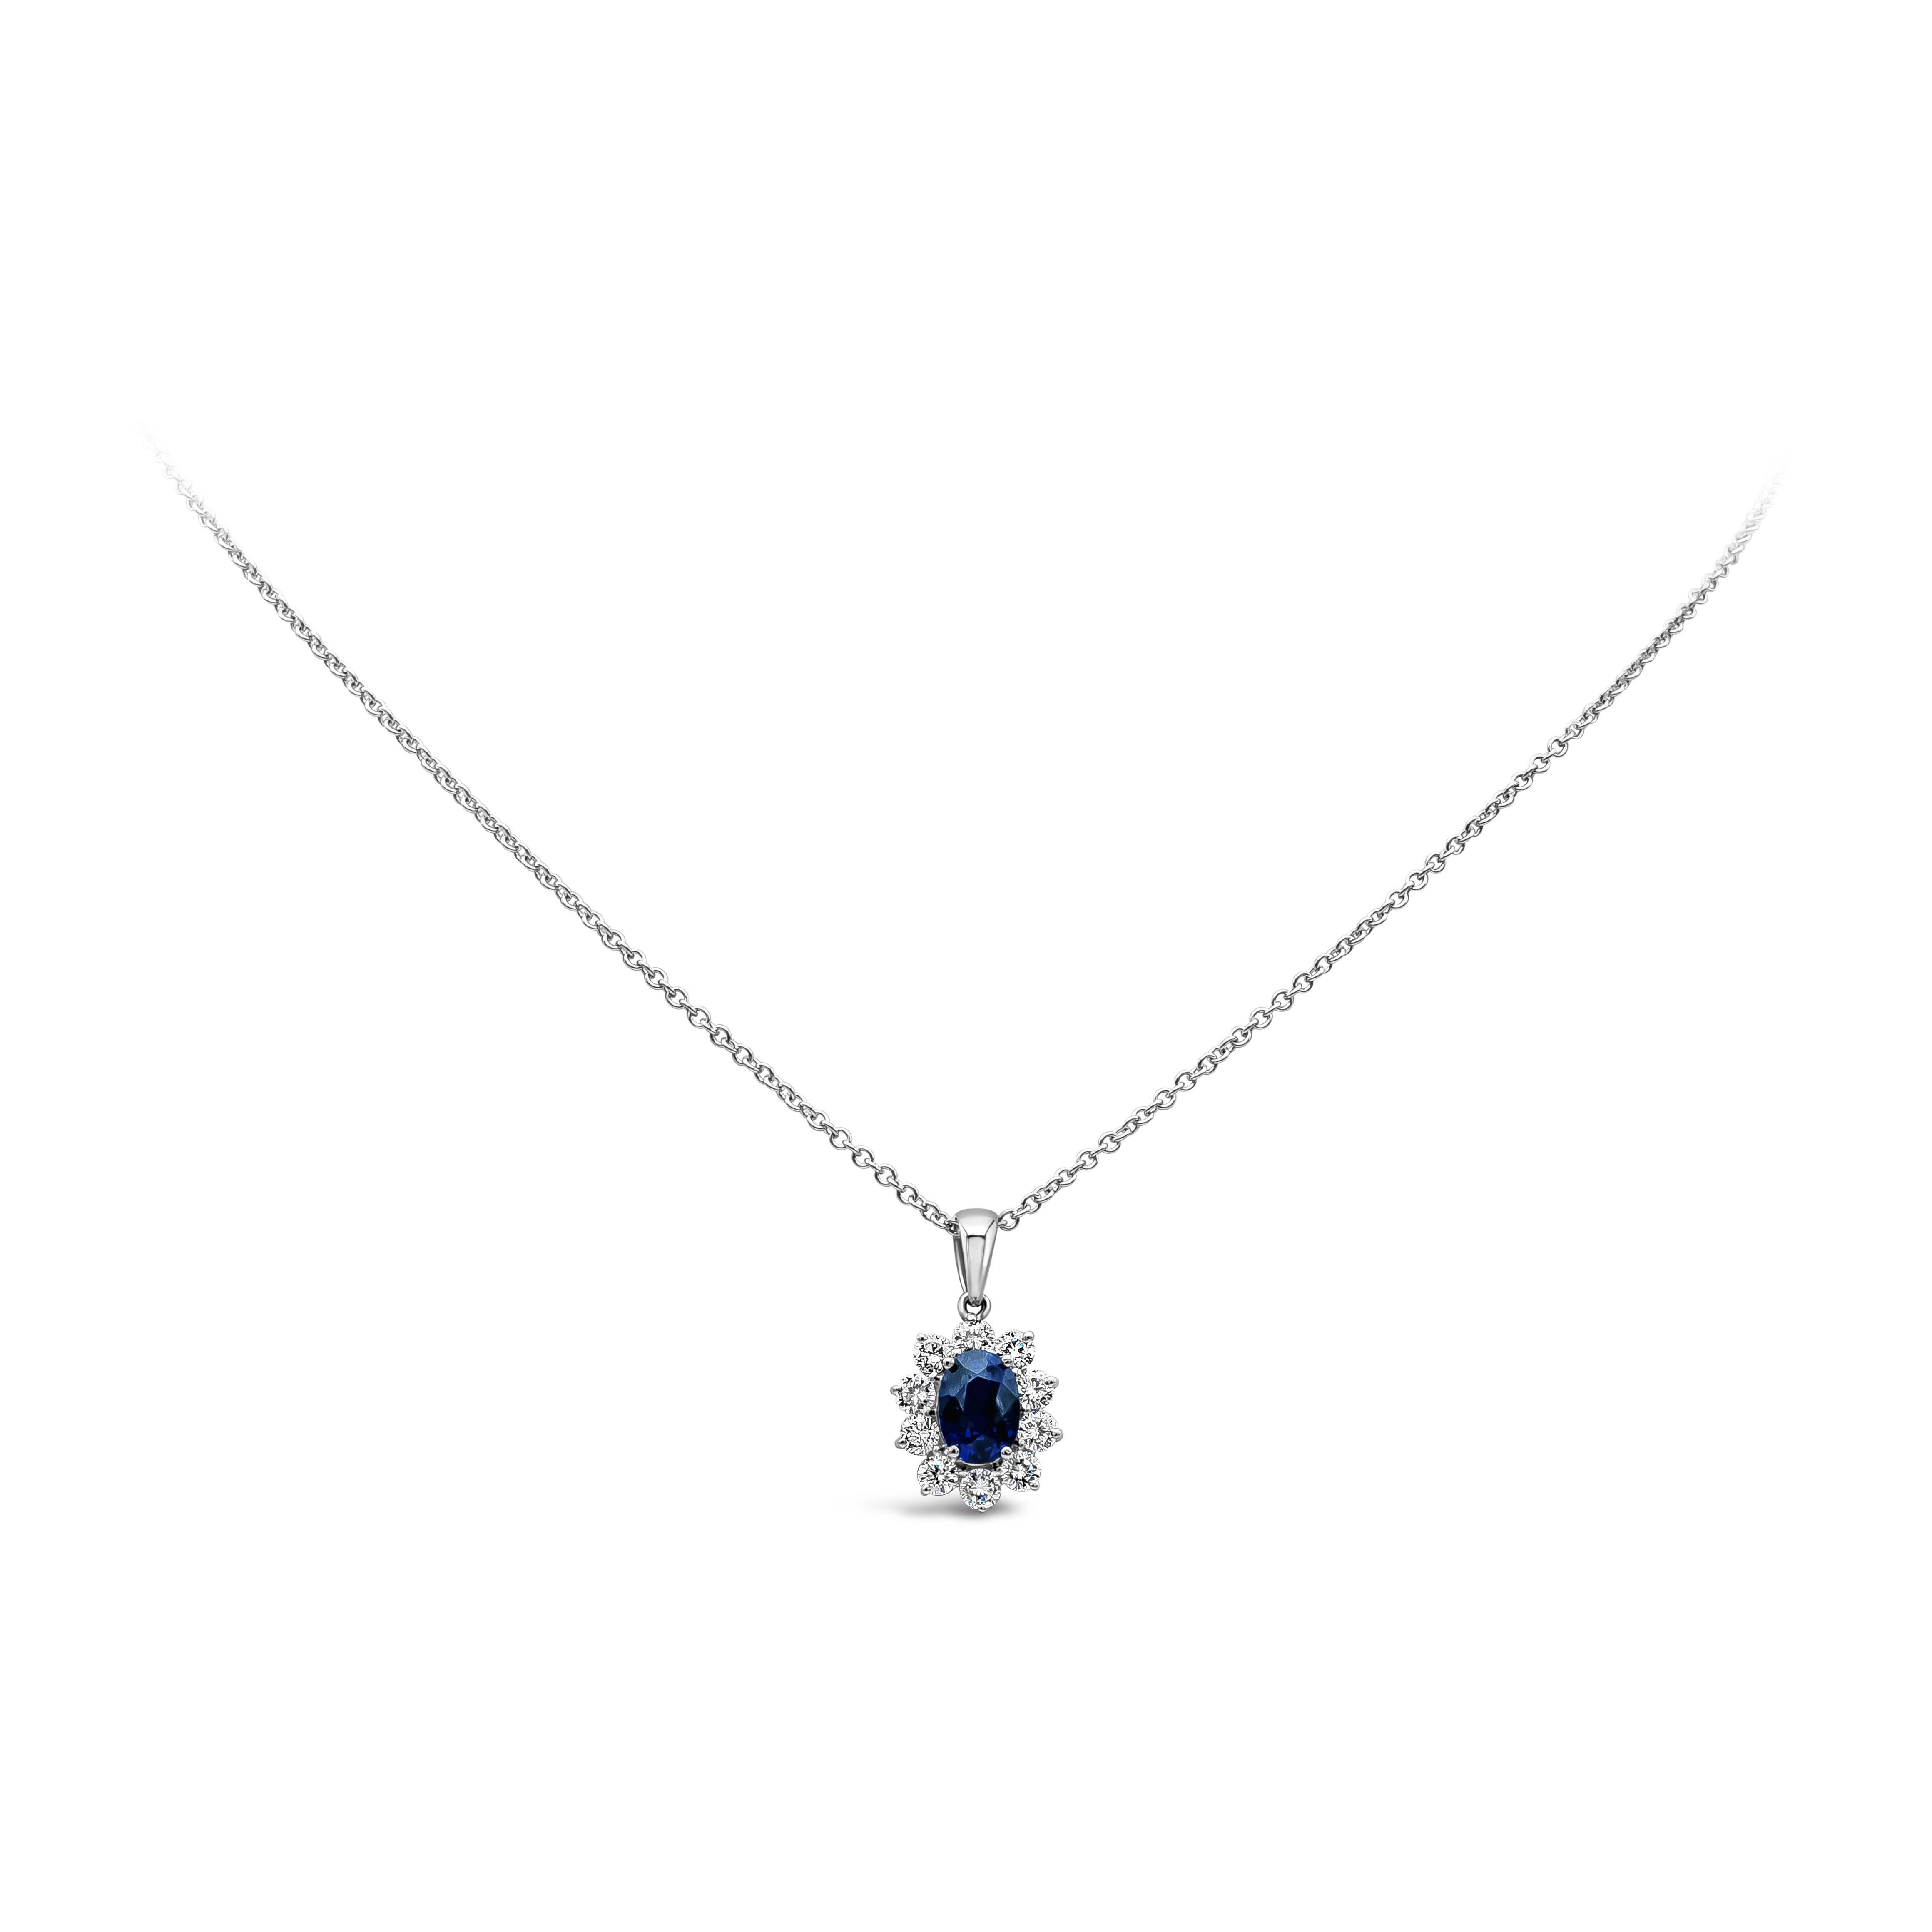 A beautiful pendant necklace showcasing a 1.90 Carat Oval Shape Blue Sapphire Center Stone, surrounded by 10 round brilliant diamonds that weighs 0.88 carats in total, FG color, VS/SI clarity, and set in 18k White Gold.

Style available in different